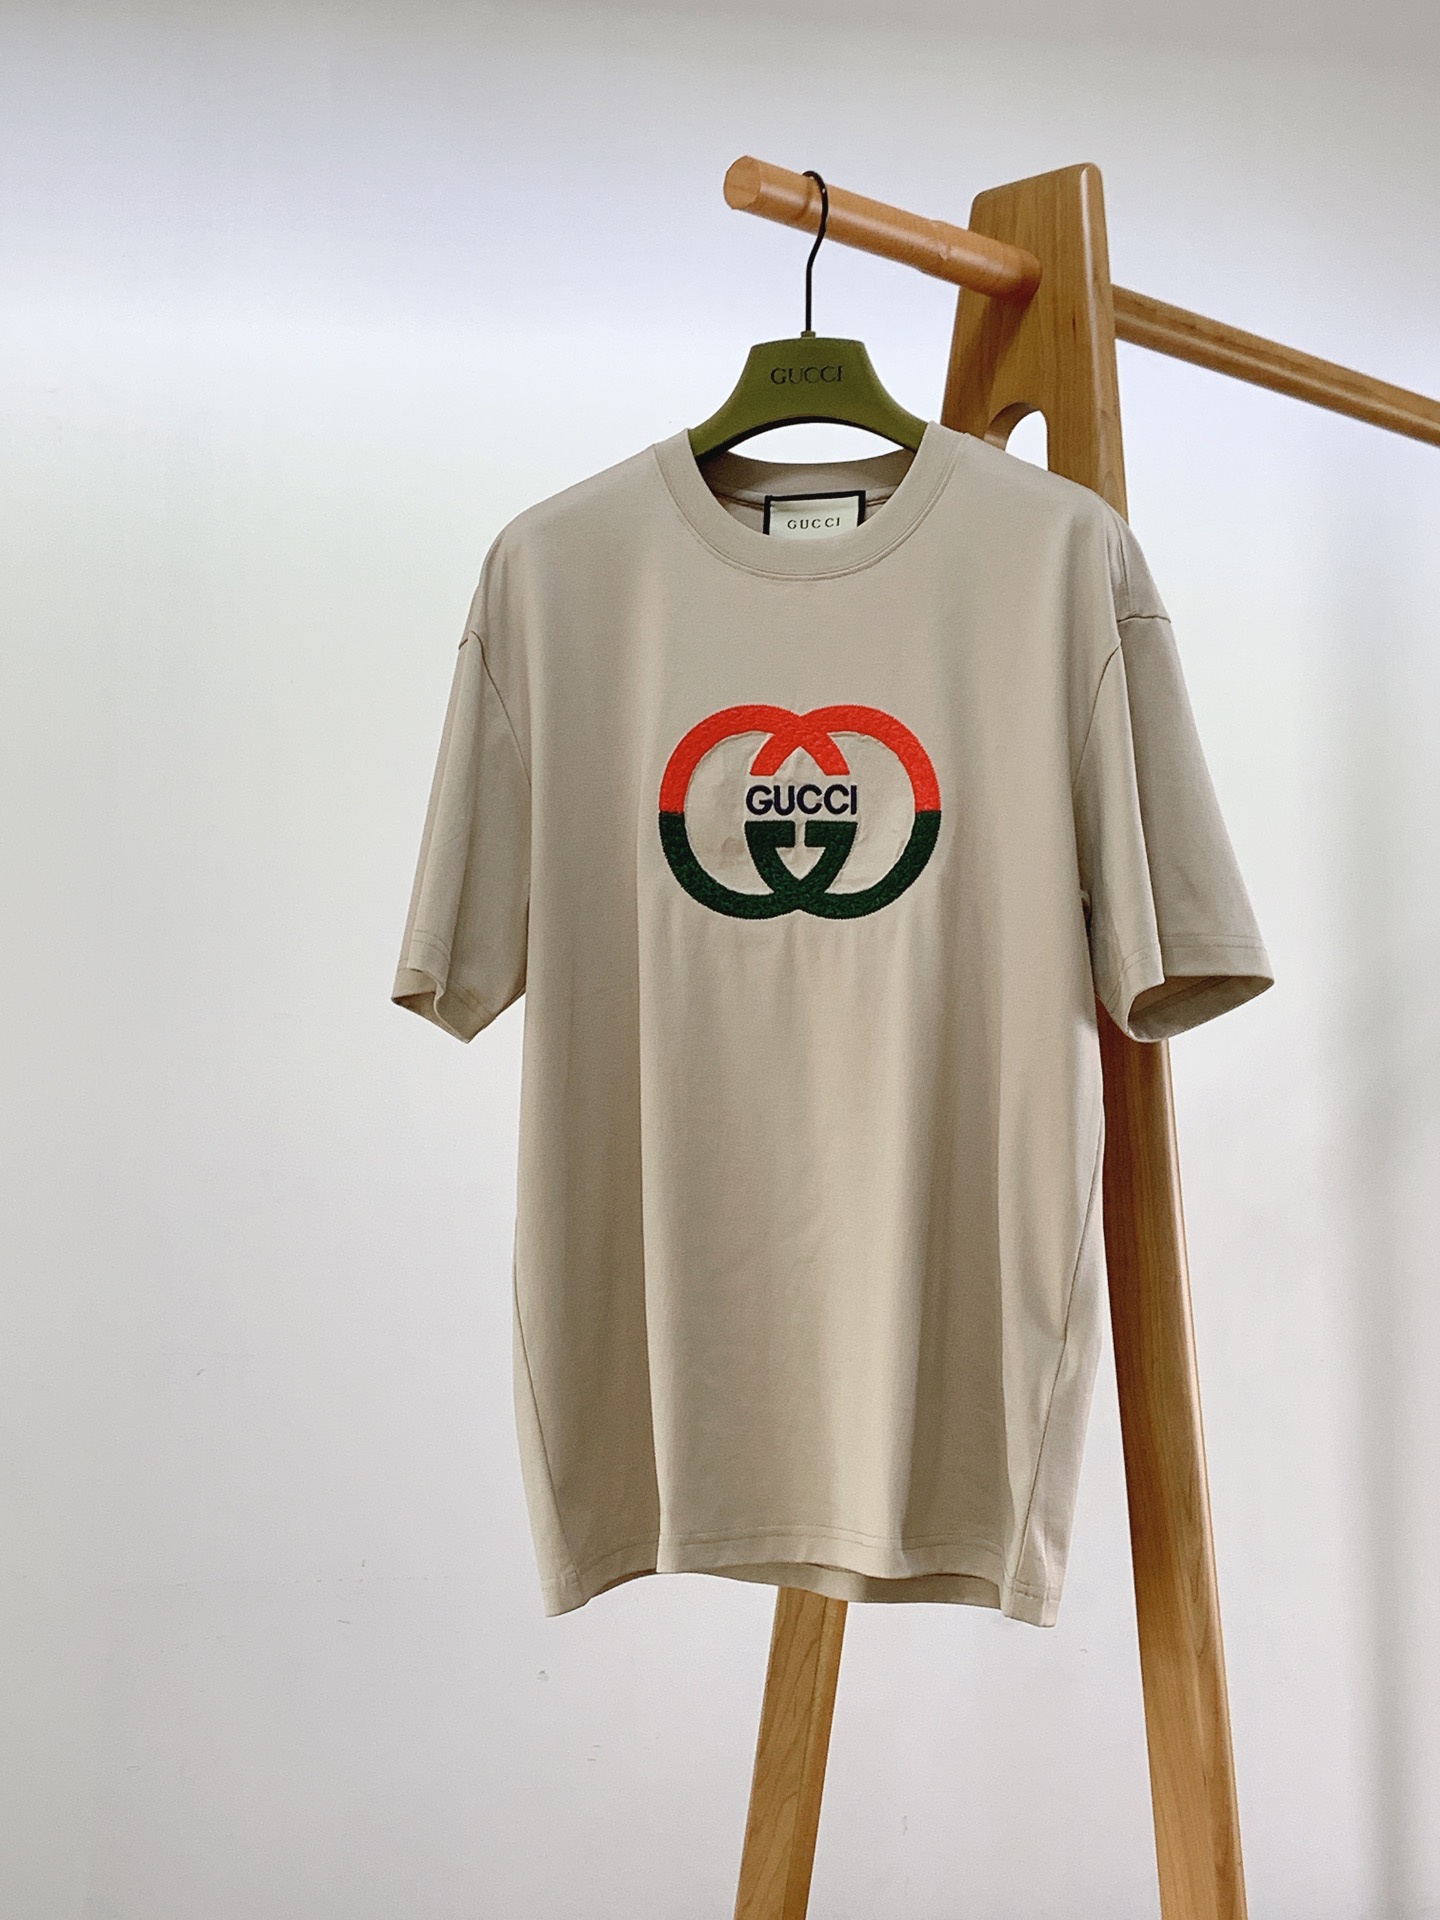 Gucci AAAAA
 Clothing T-Shirt Replica Wholesale
 Embroidery Unisex Spring/Summer Collection